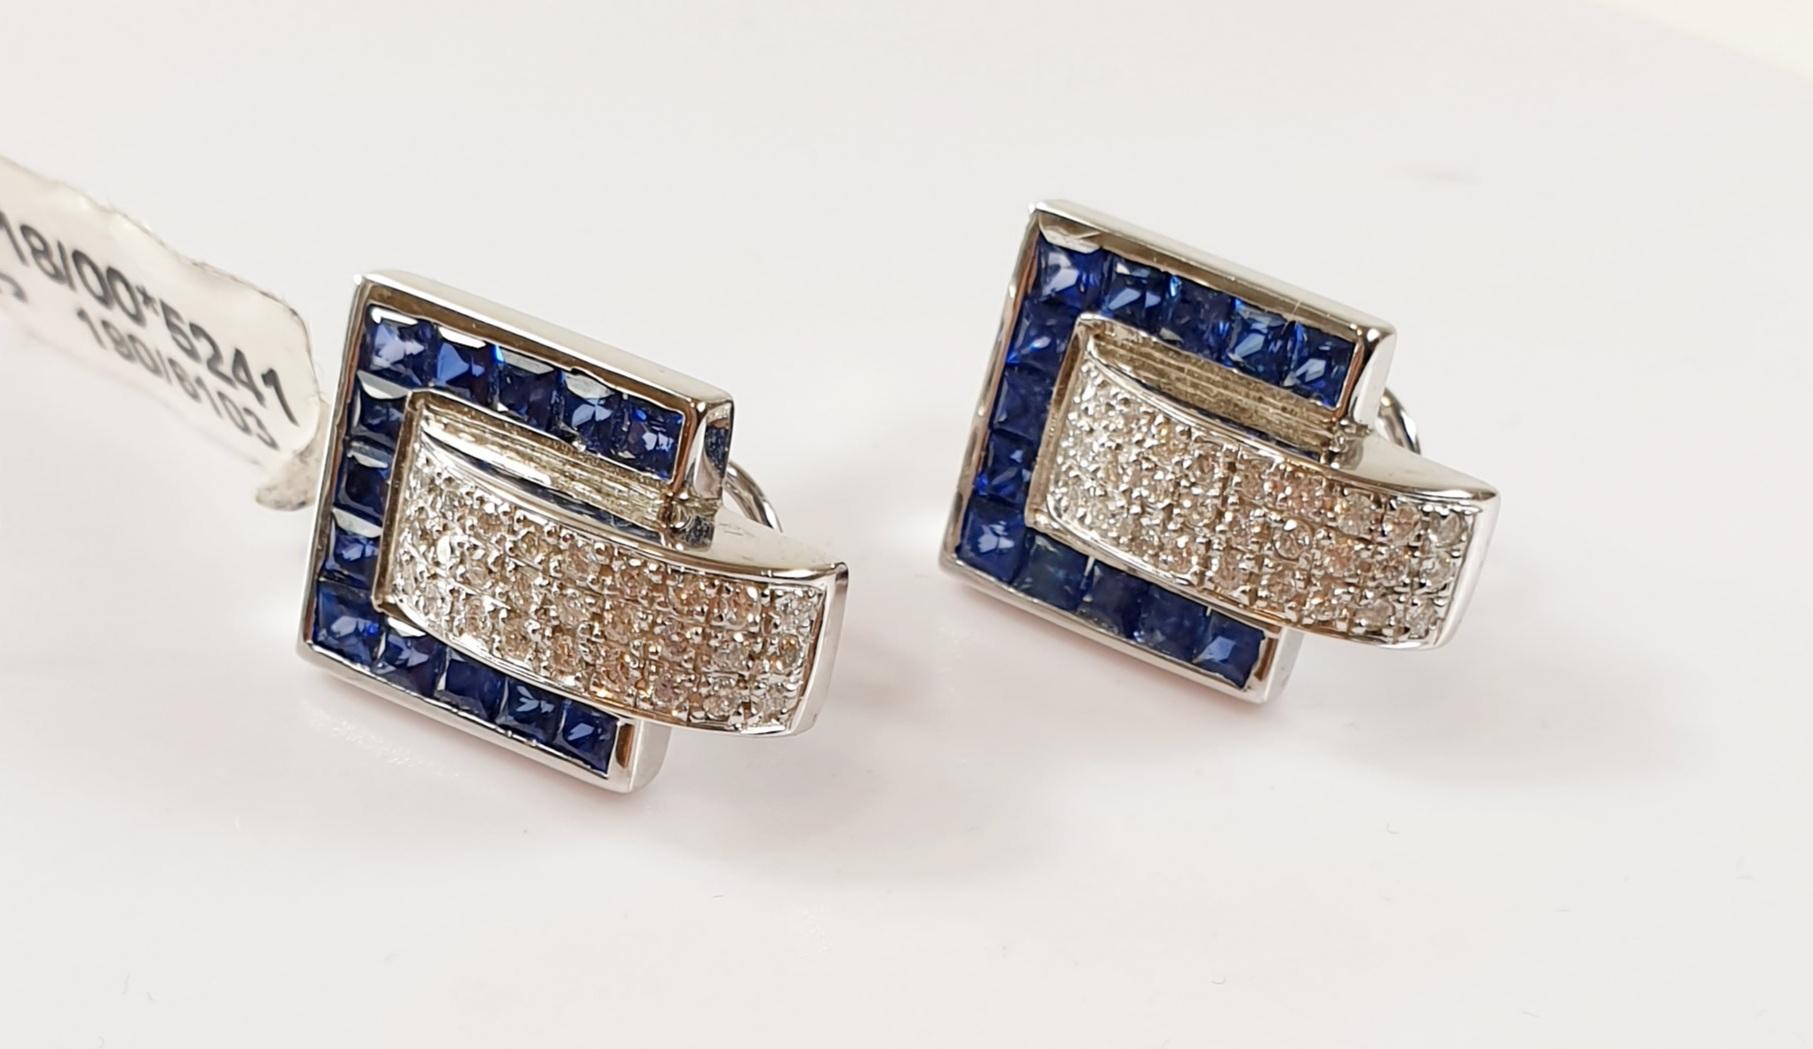 Contemporary Diamond and Sapphire Hoops Earrings in 18 Karat White Gold 